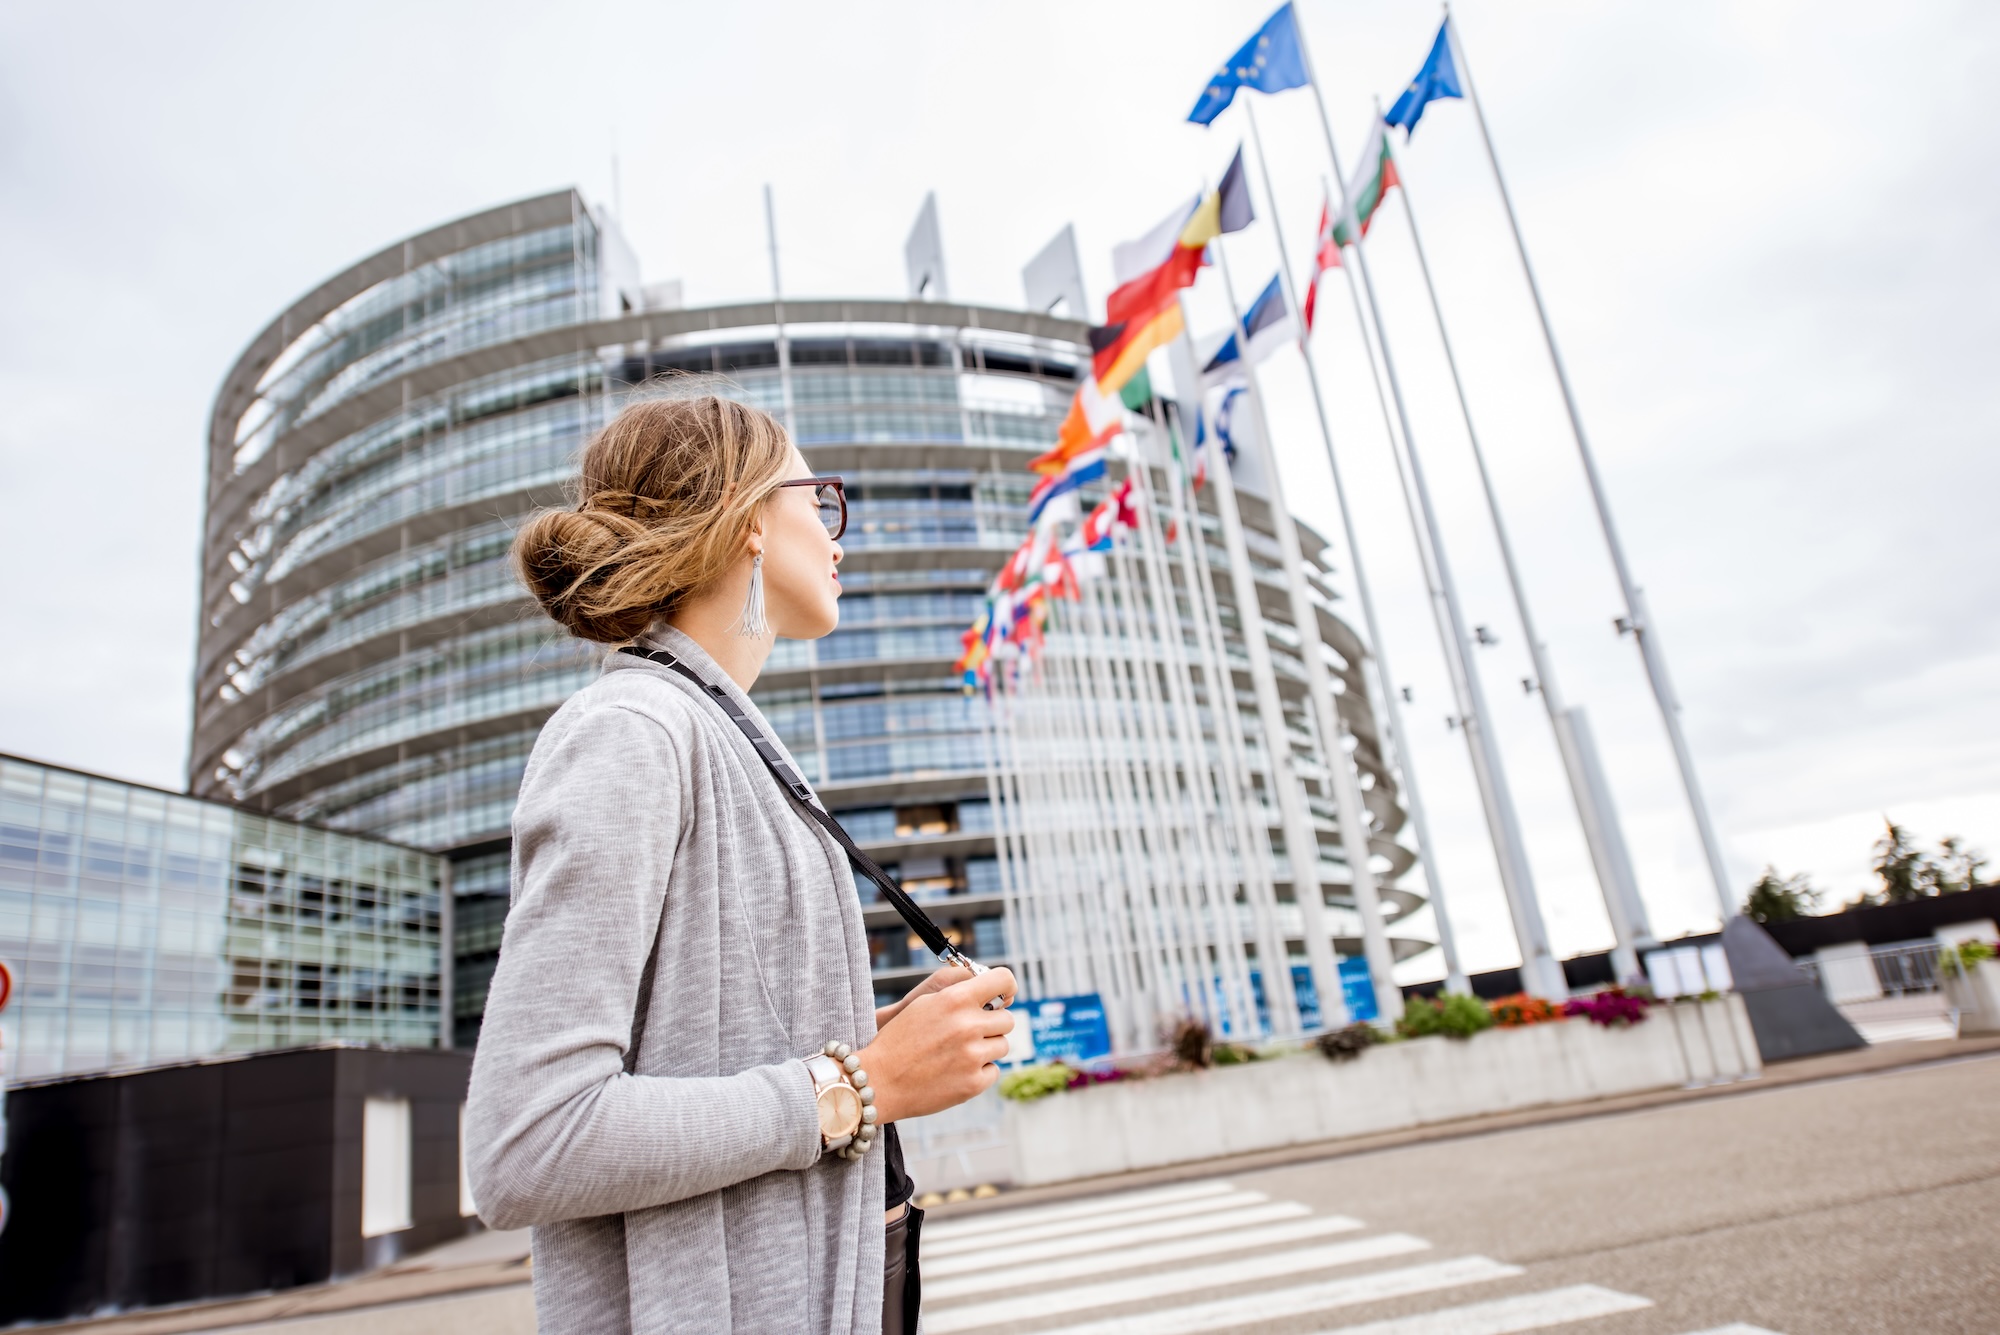 Young woman tourist standing with photo camera in front of the European parliament building in Strasbourg, France